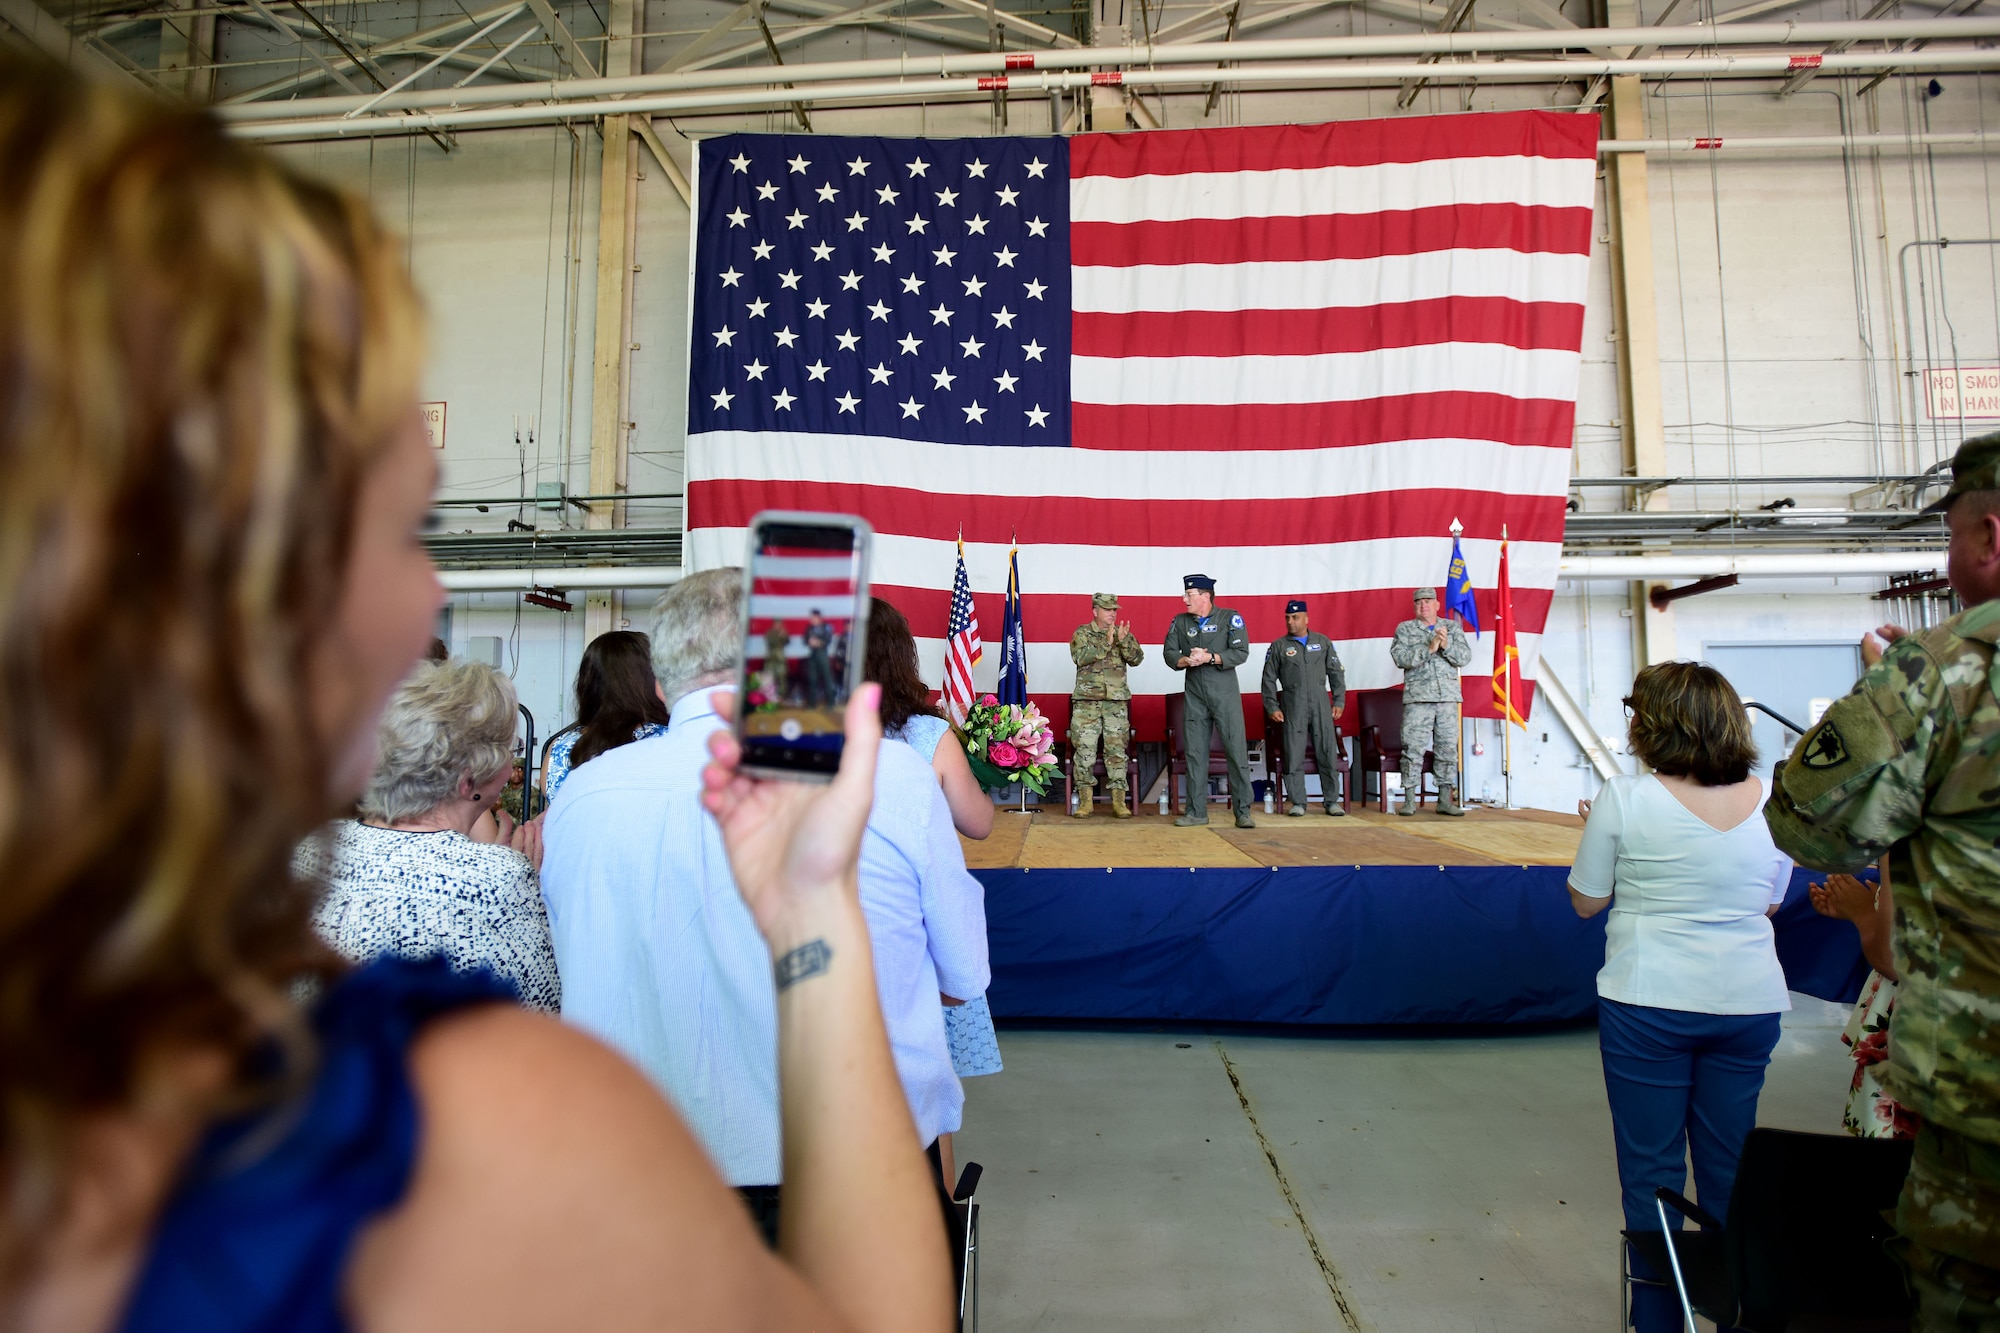 U.S. Airmen of the 169th Fighter Wing and the South Carolina Air National Guard, assemble for a change of command ceremony at McEntire Joint National Guard Base, S.C., June 23, 2018. Col. Nicholas Gentile Jr. relinquishes command of the 169th Fighter Wing to Col. Akshai Gandhi. (U.S. Air National Guard photo by Senior Airman Megan R. Floyd)